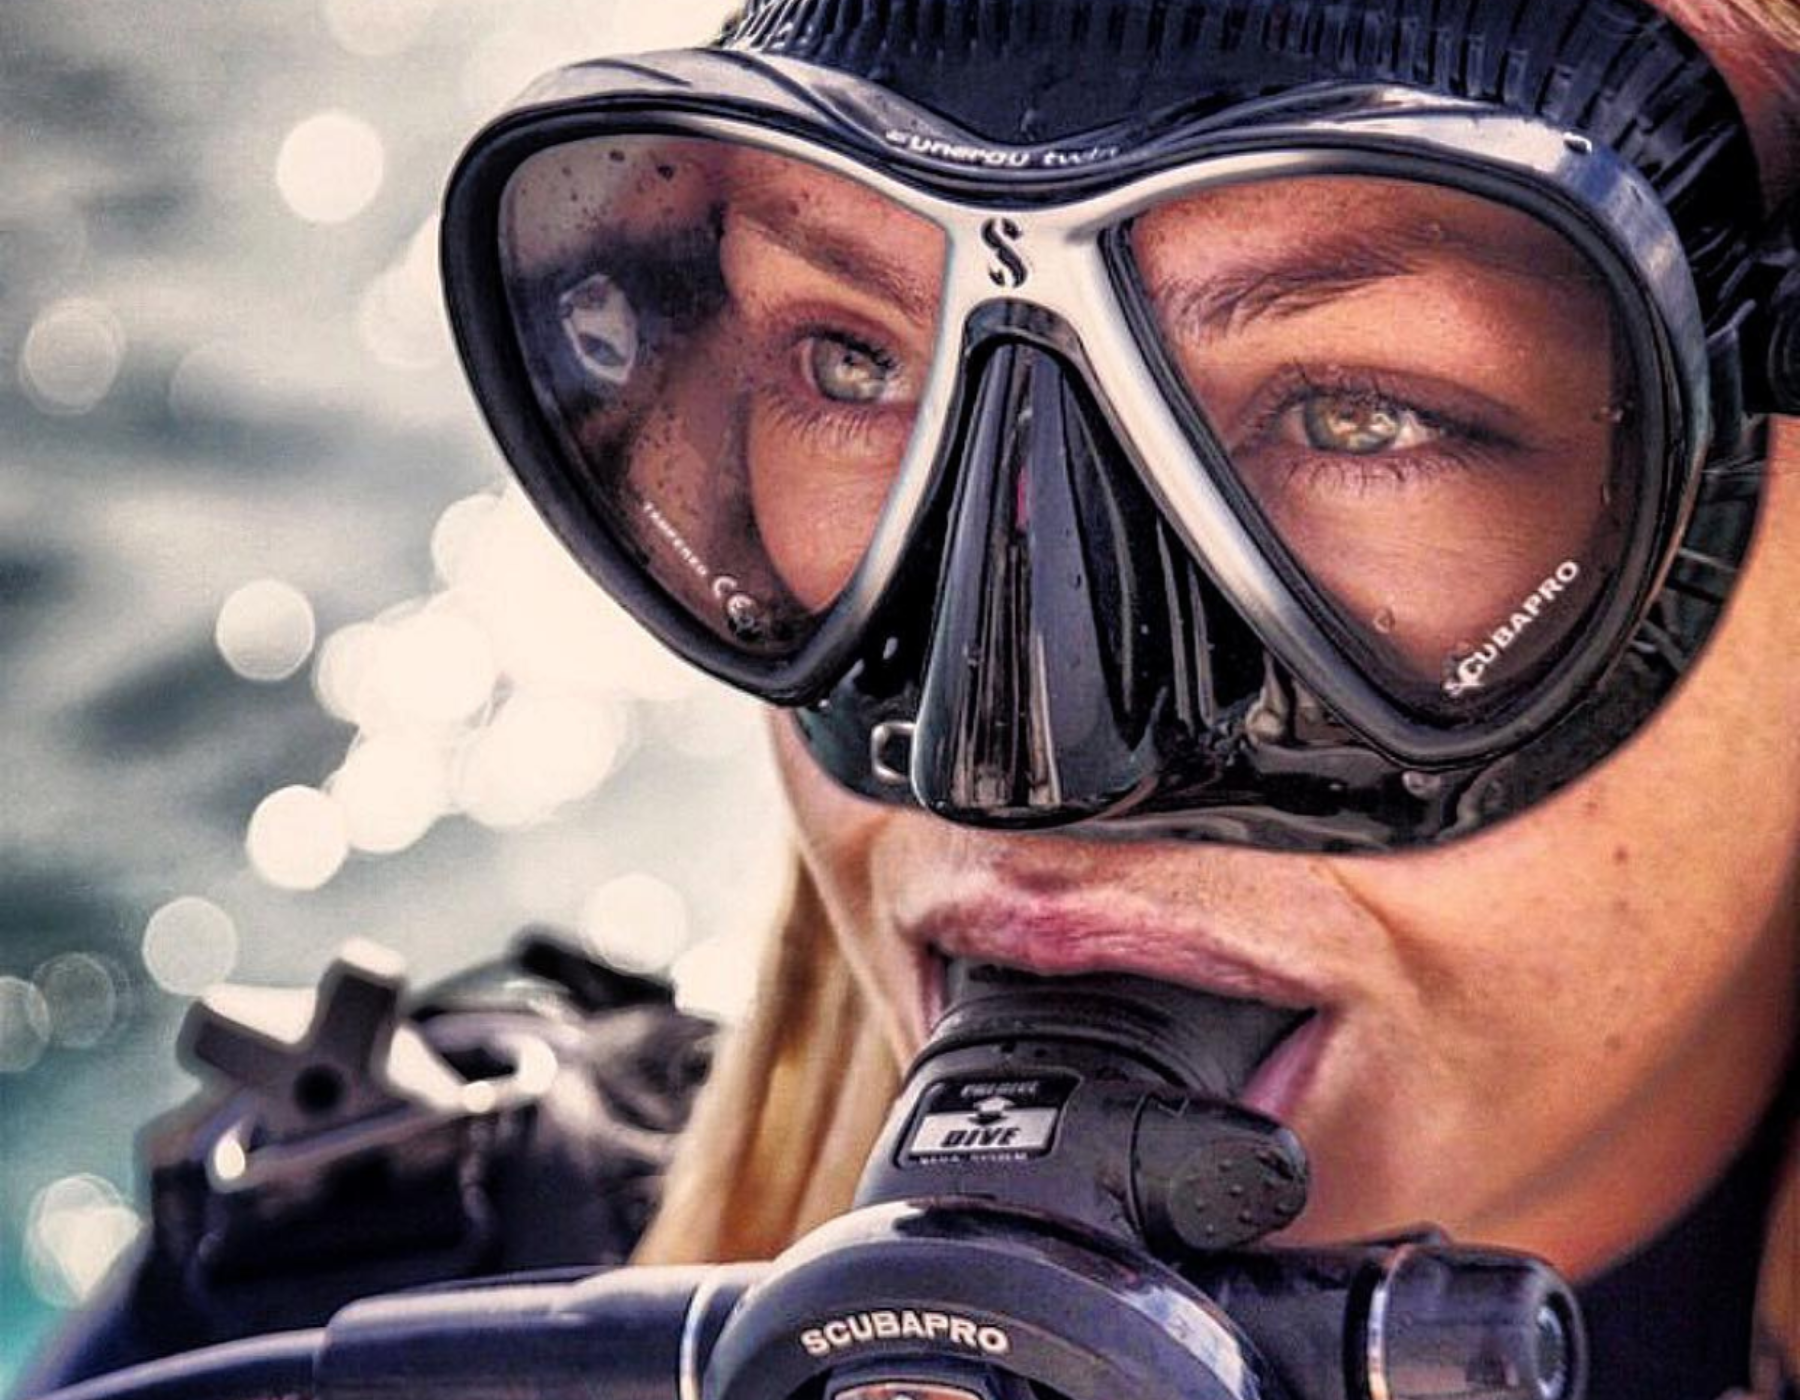 Lady looking happily thoughtful in scuba gear